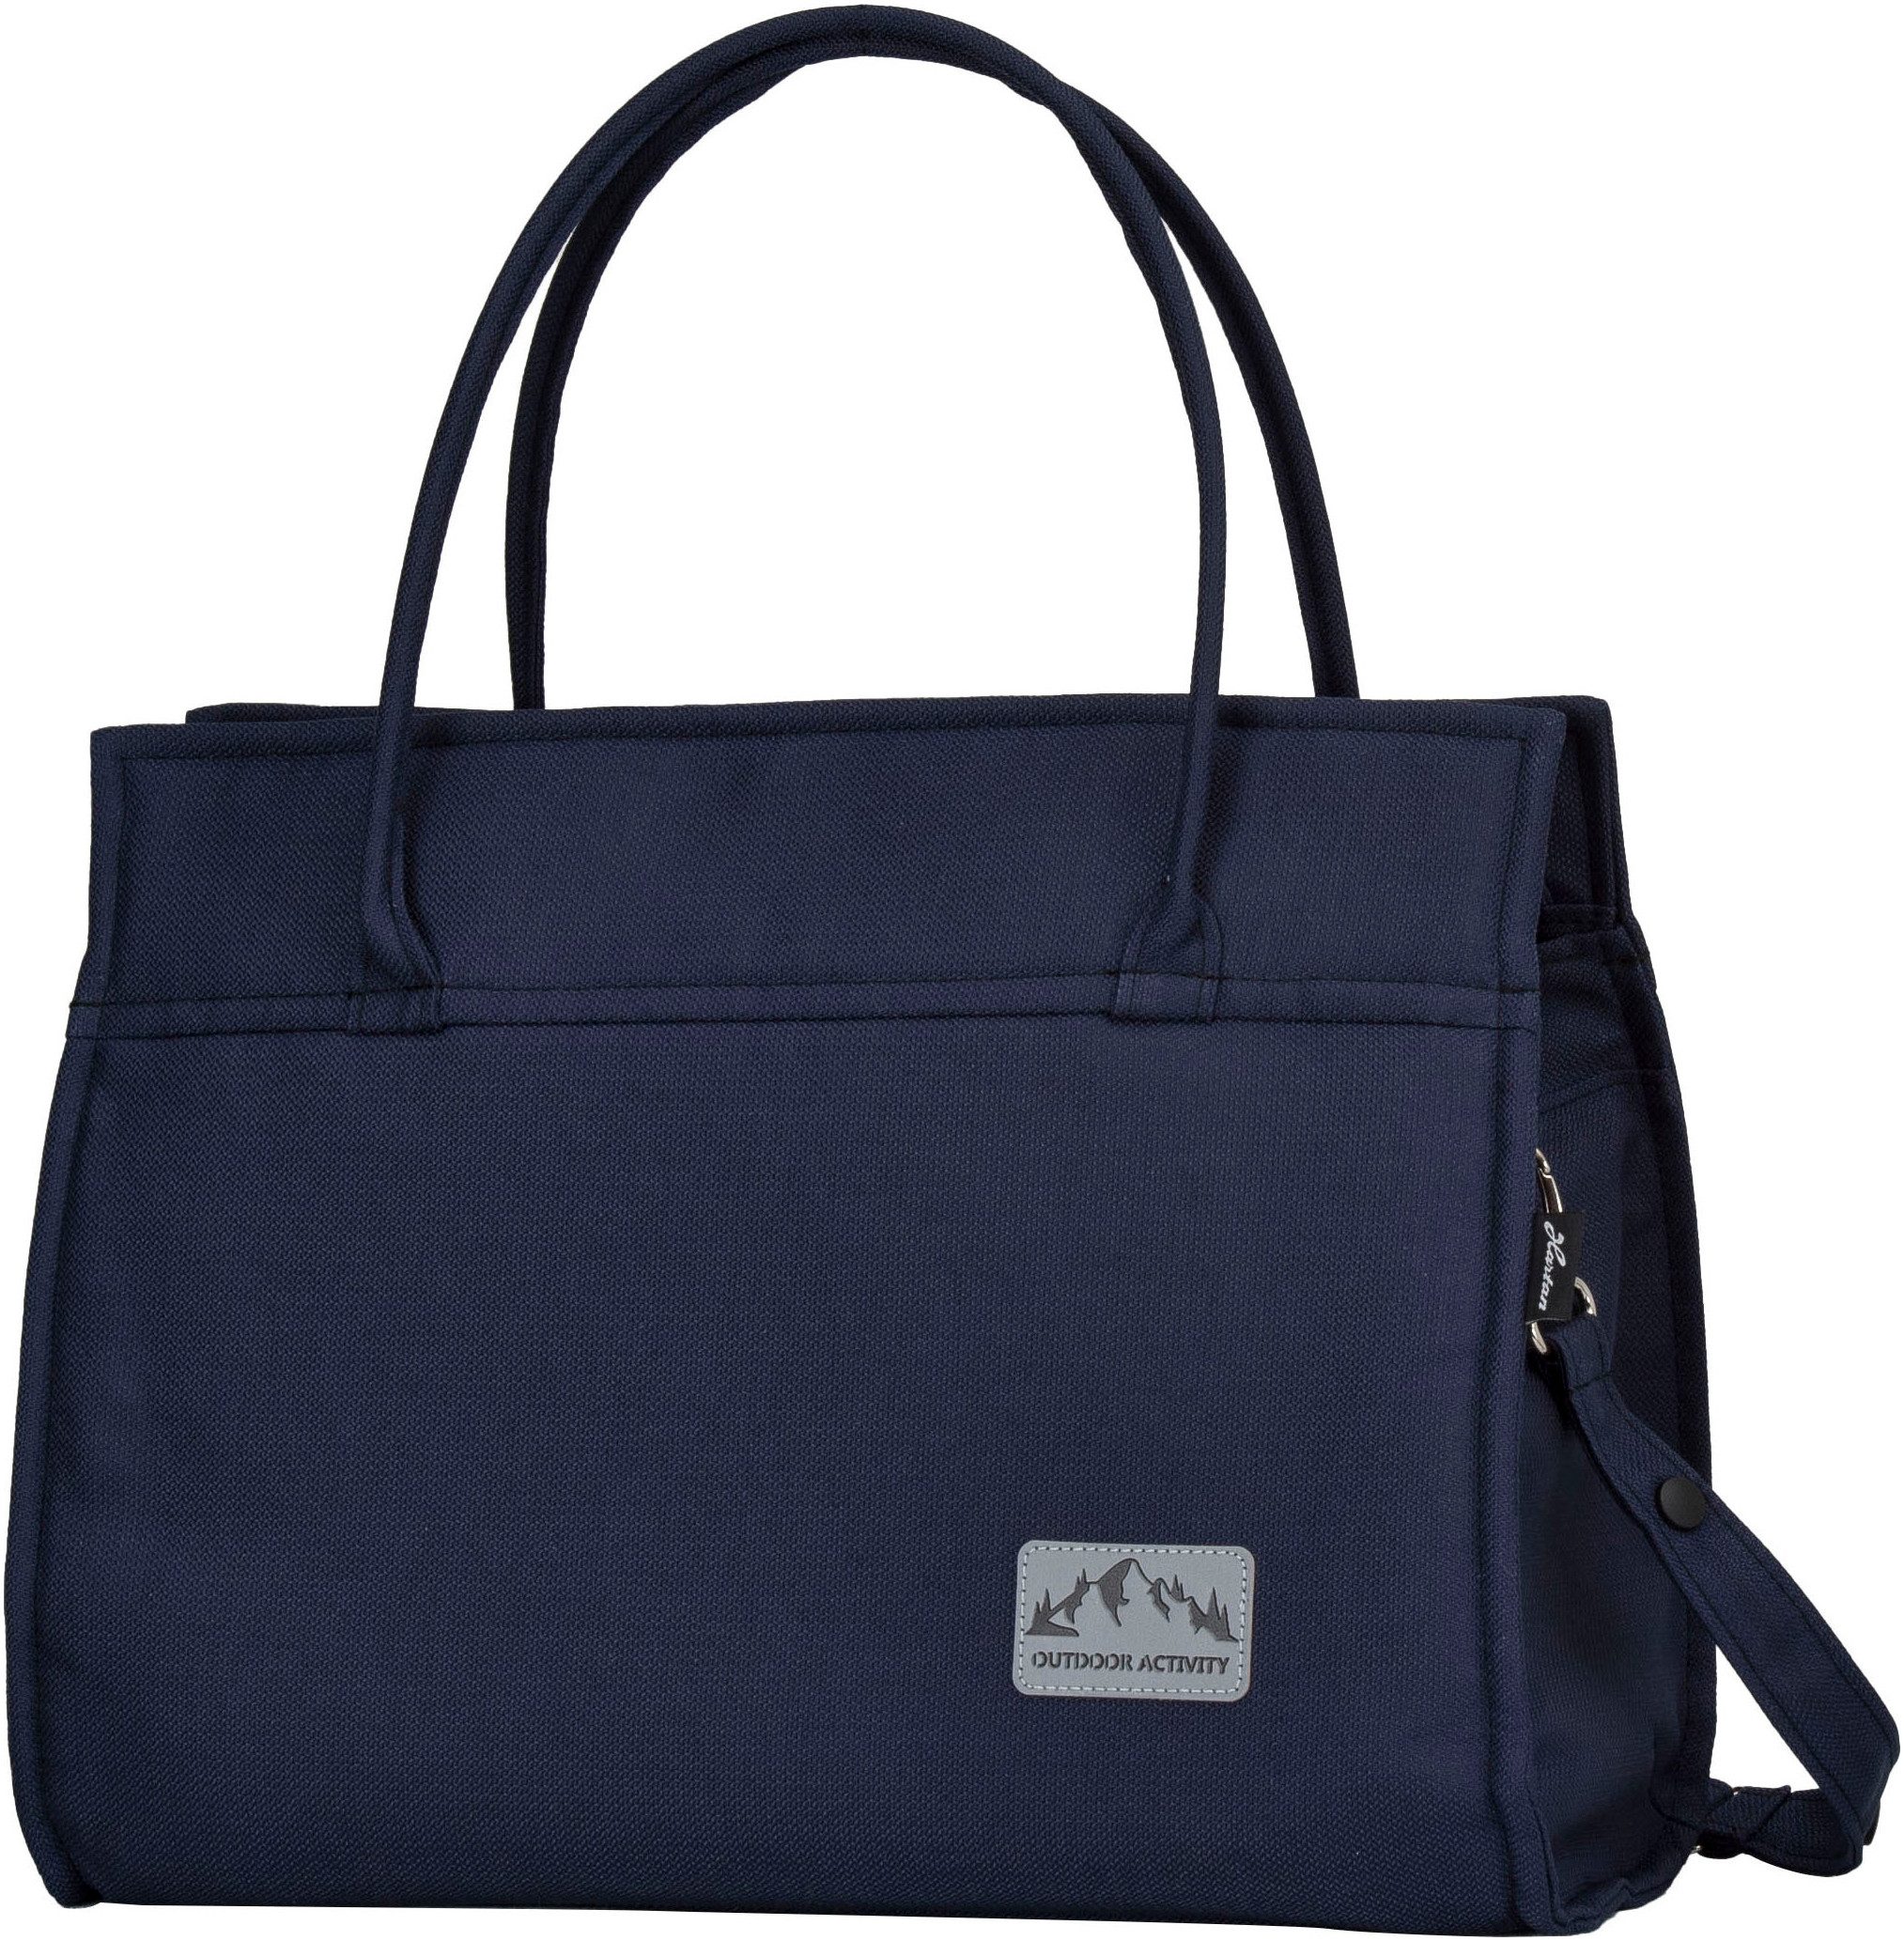 Hartan Wickeltasche Casual bag - Casual Collection, Made in Germany